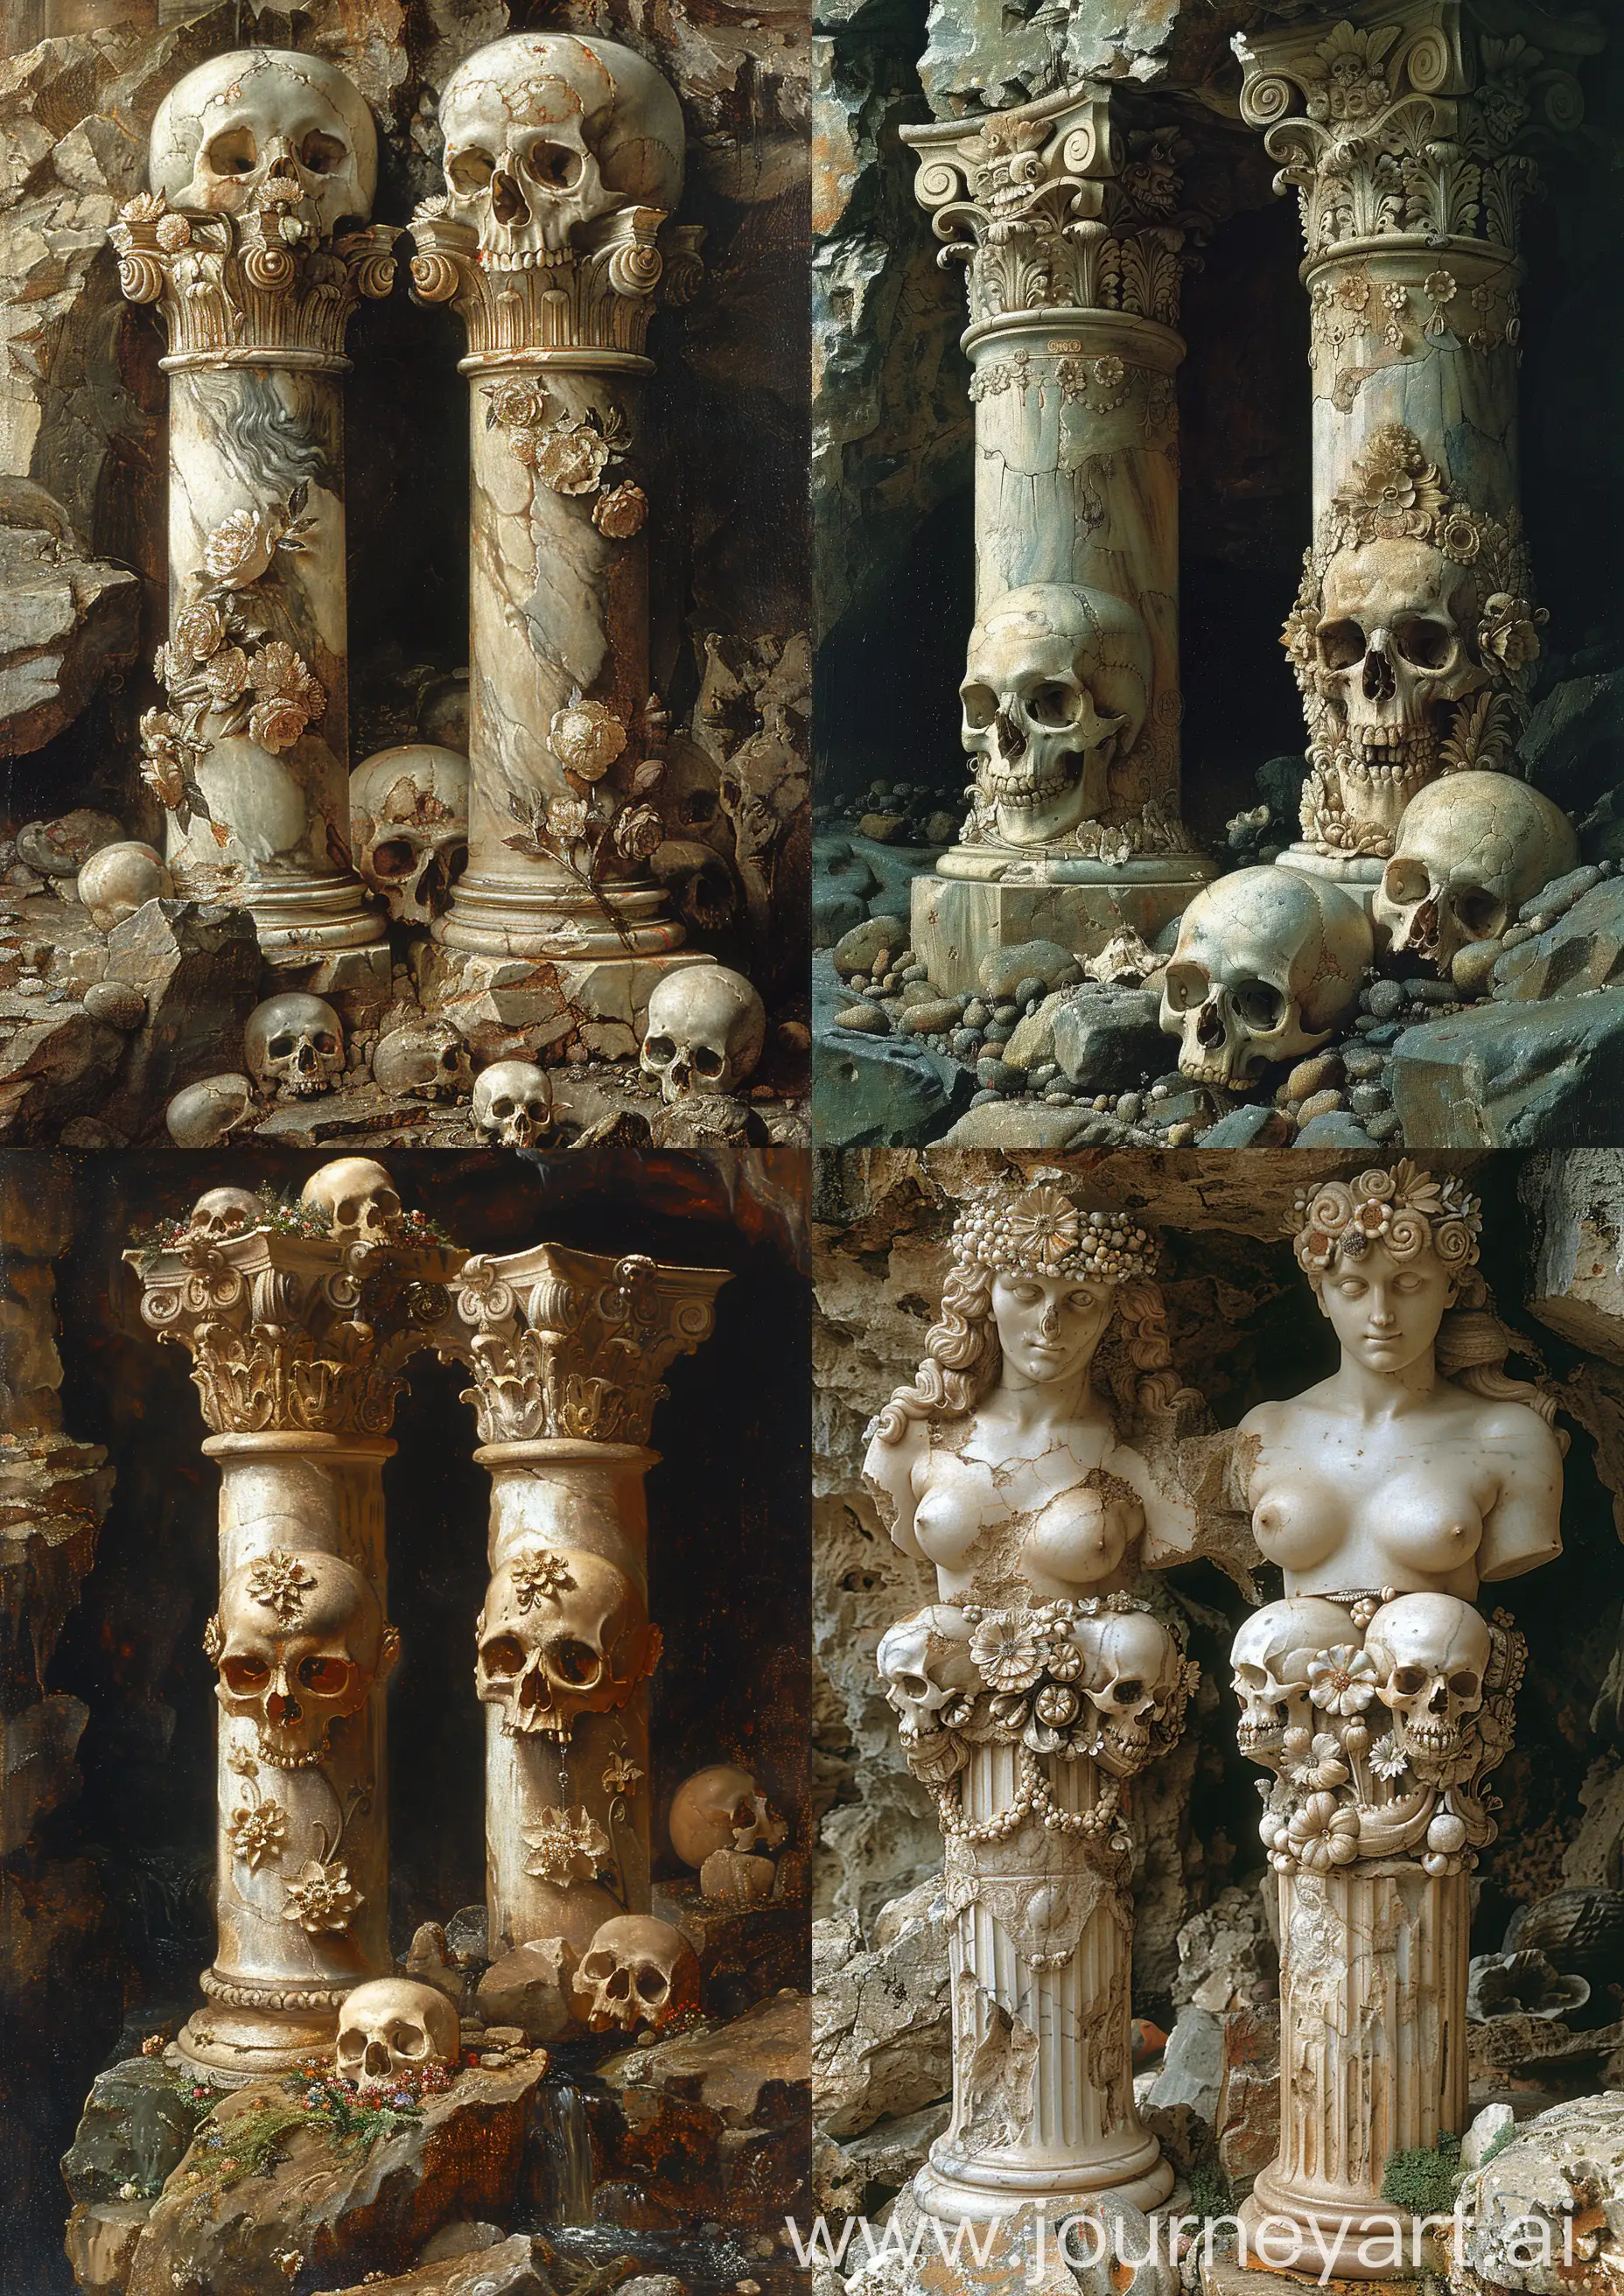 Edward Burne-Jones painting of  2 marbles columns ornate with skulls and flowers, standing on rocks, earth tones, detailed, close image, --c 22 --s 750 --v 6.0 --ar 5:7